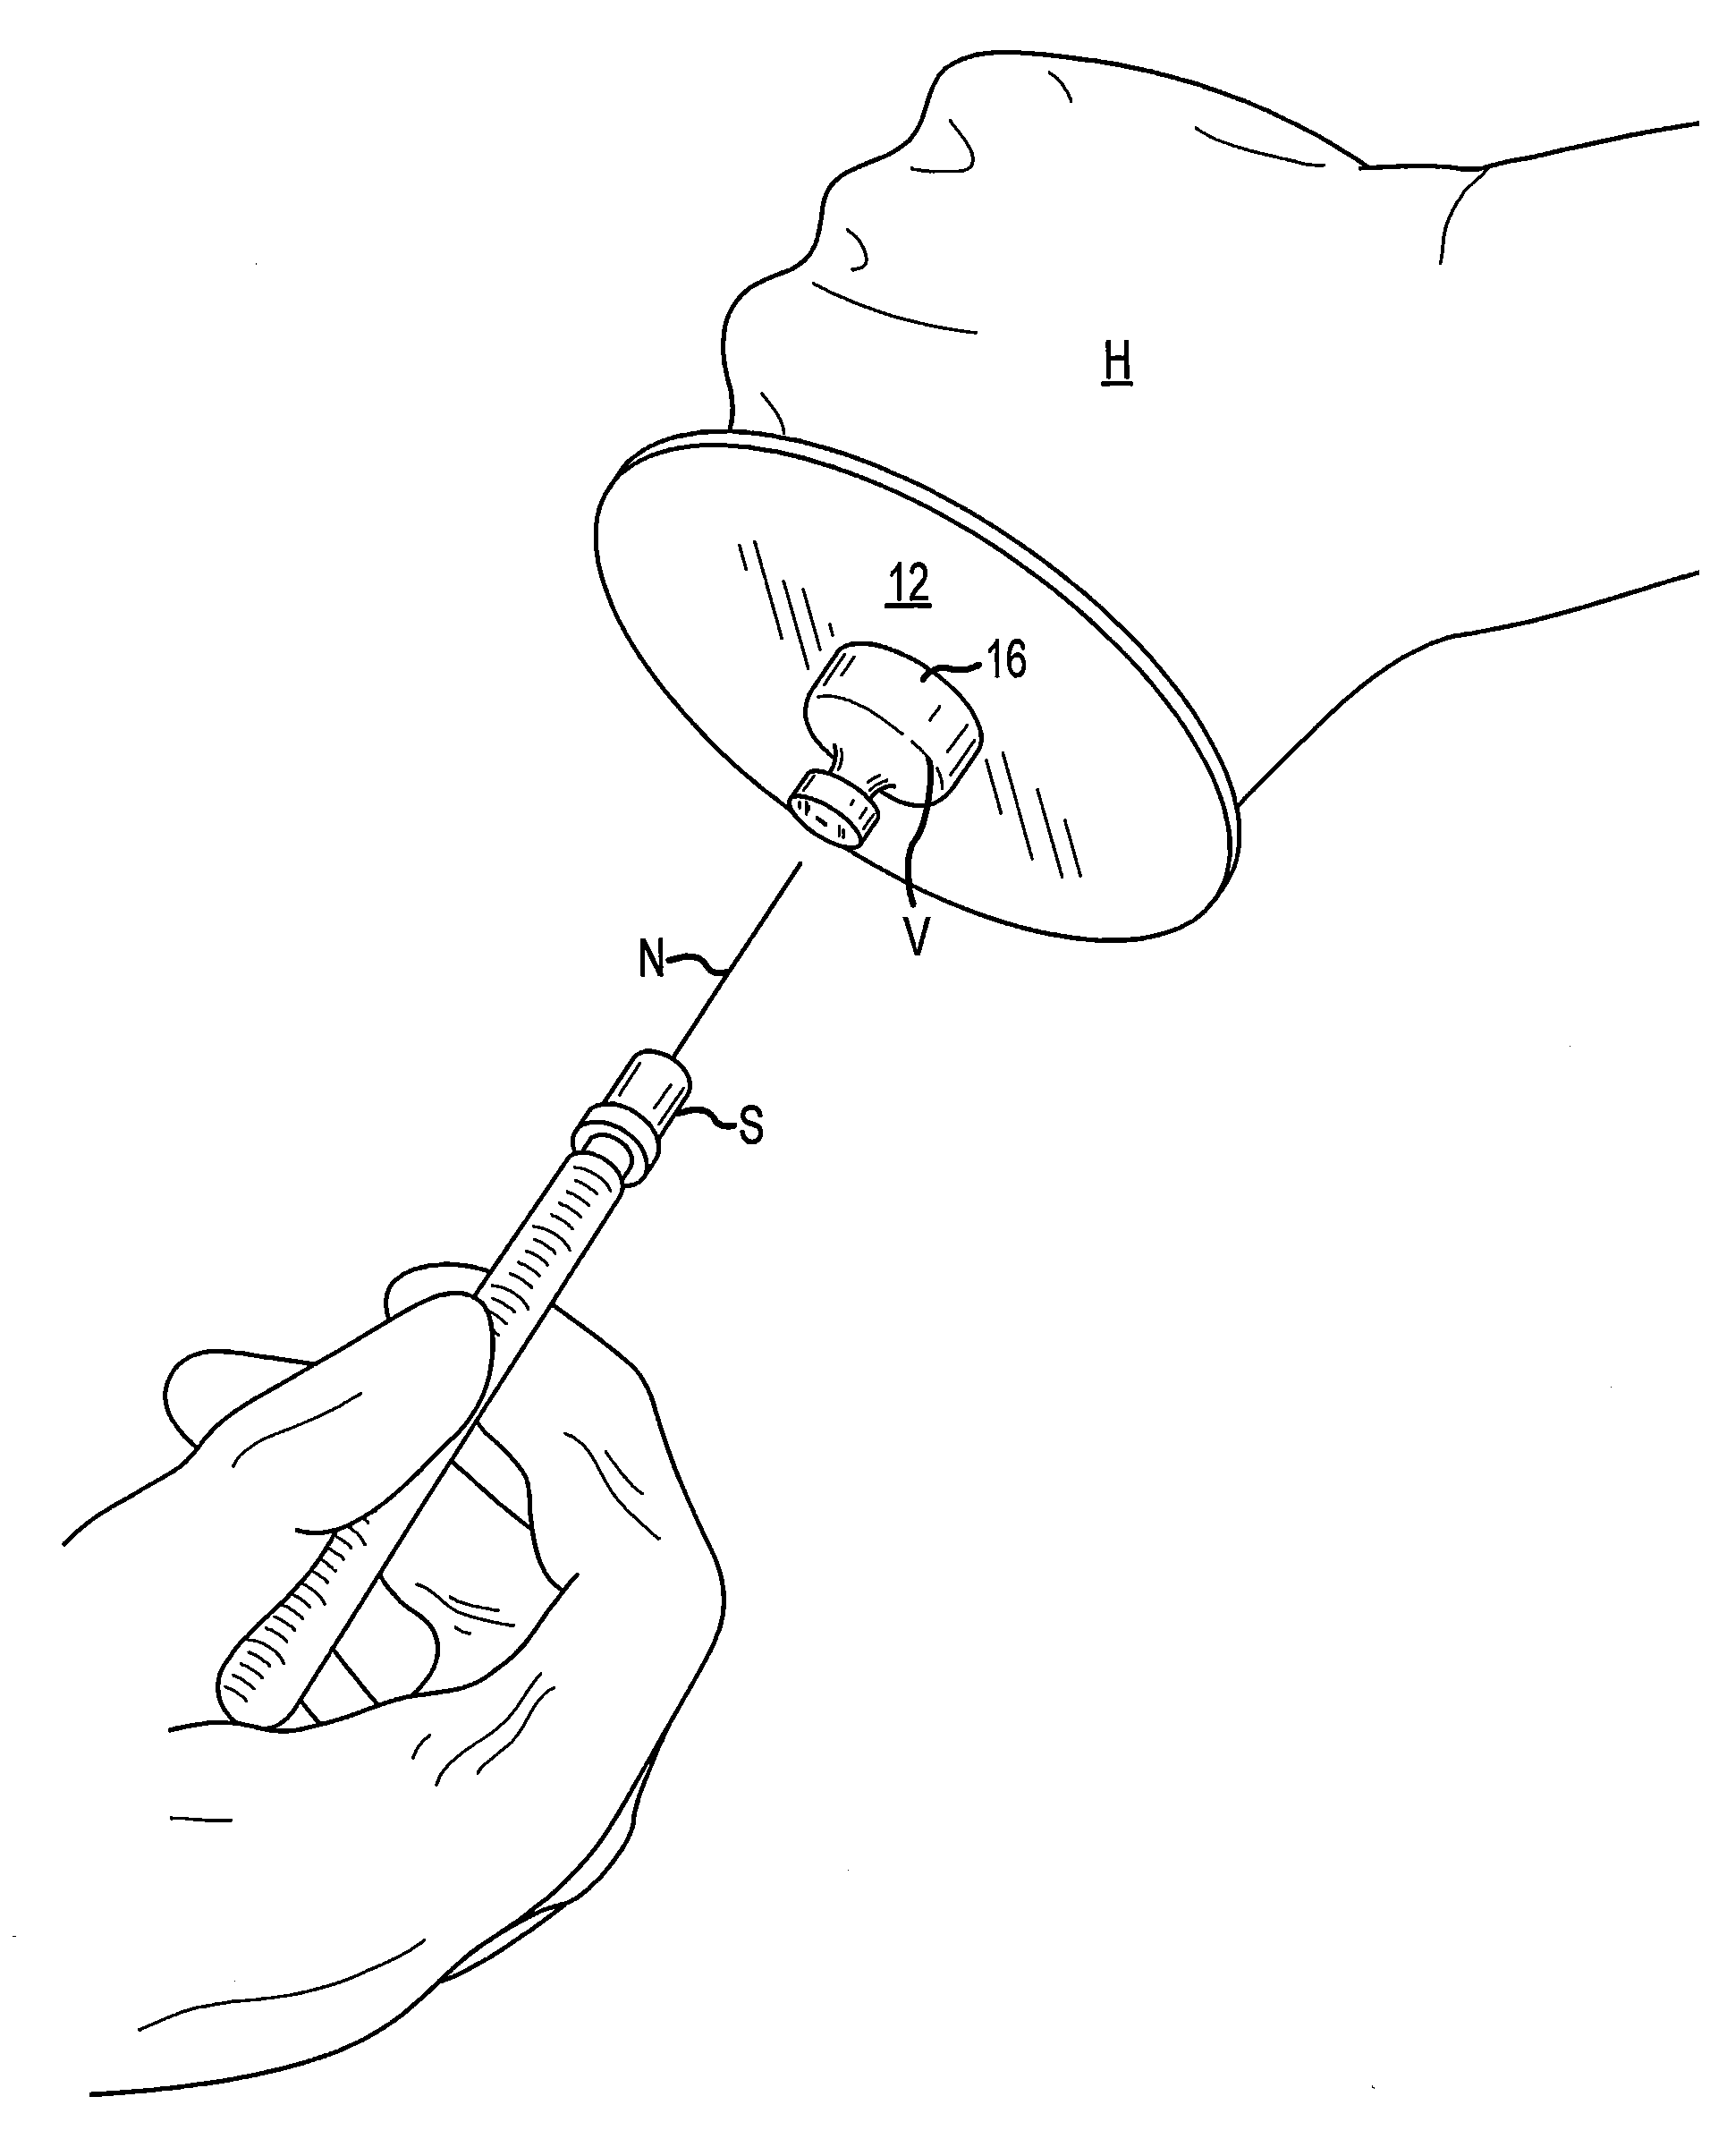 Disposable vial holder and method to prevent needle stick injuries